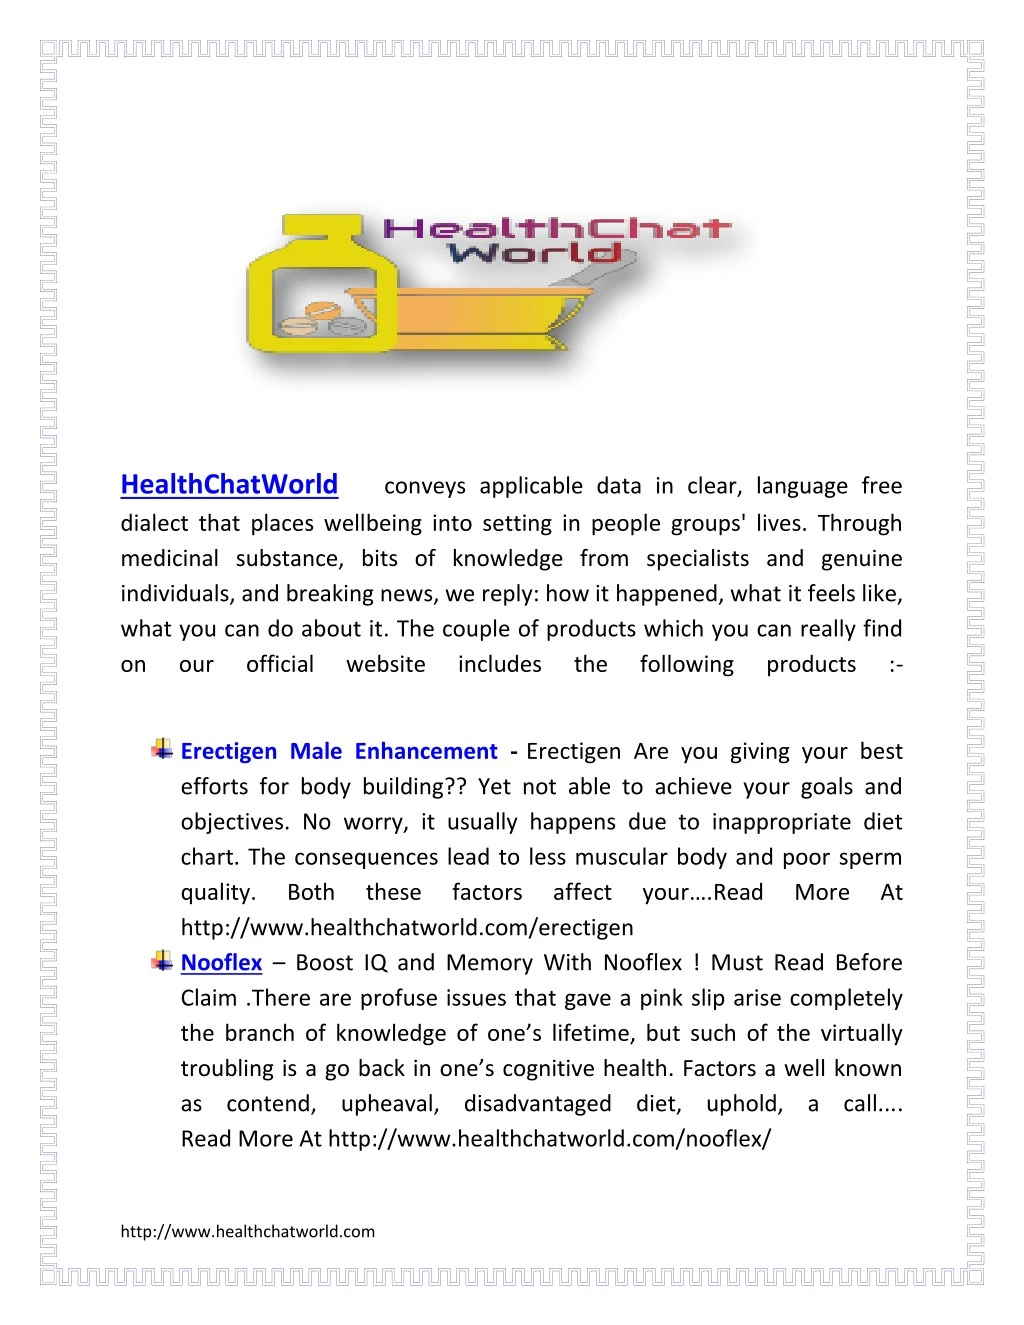 healthchatworld conveys applicable data in clear